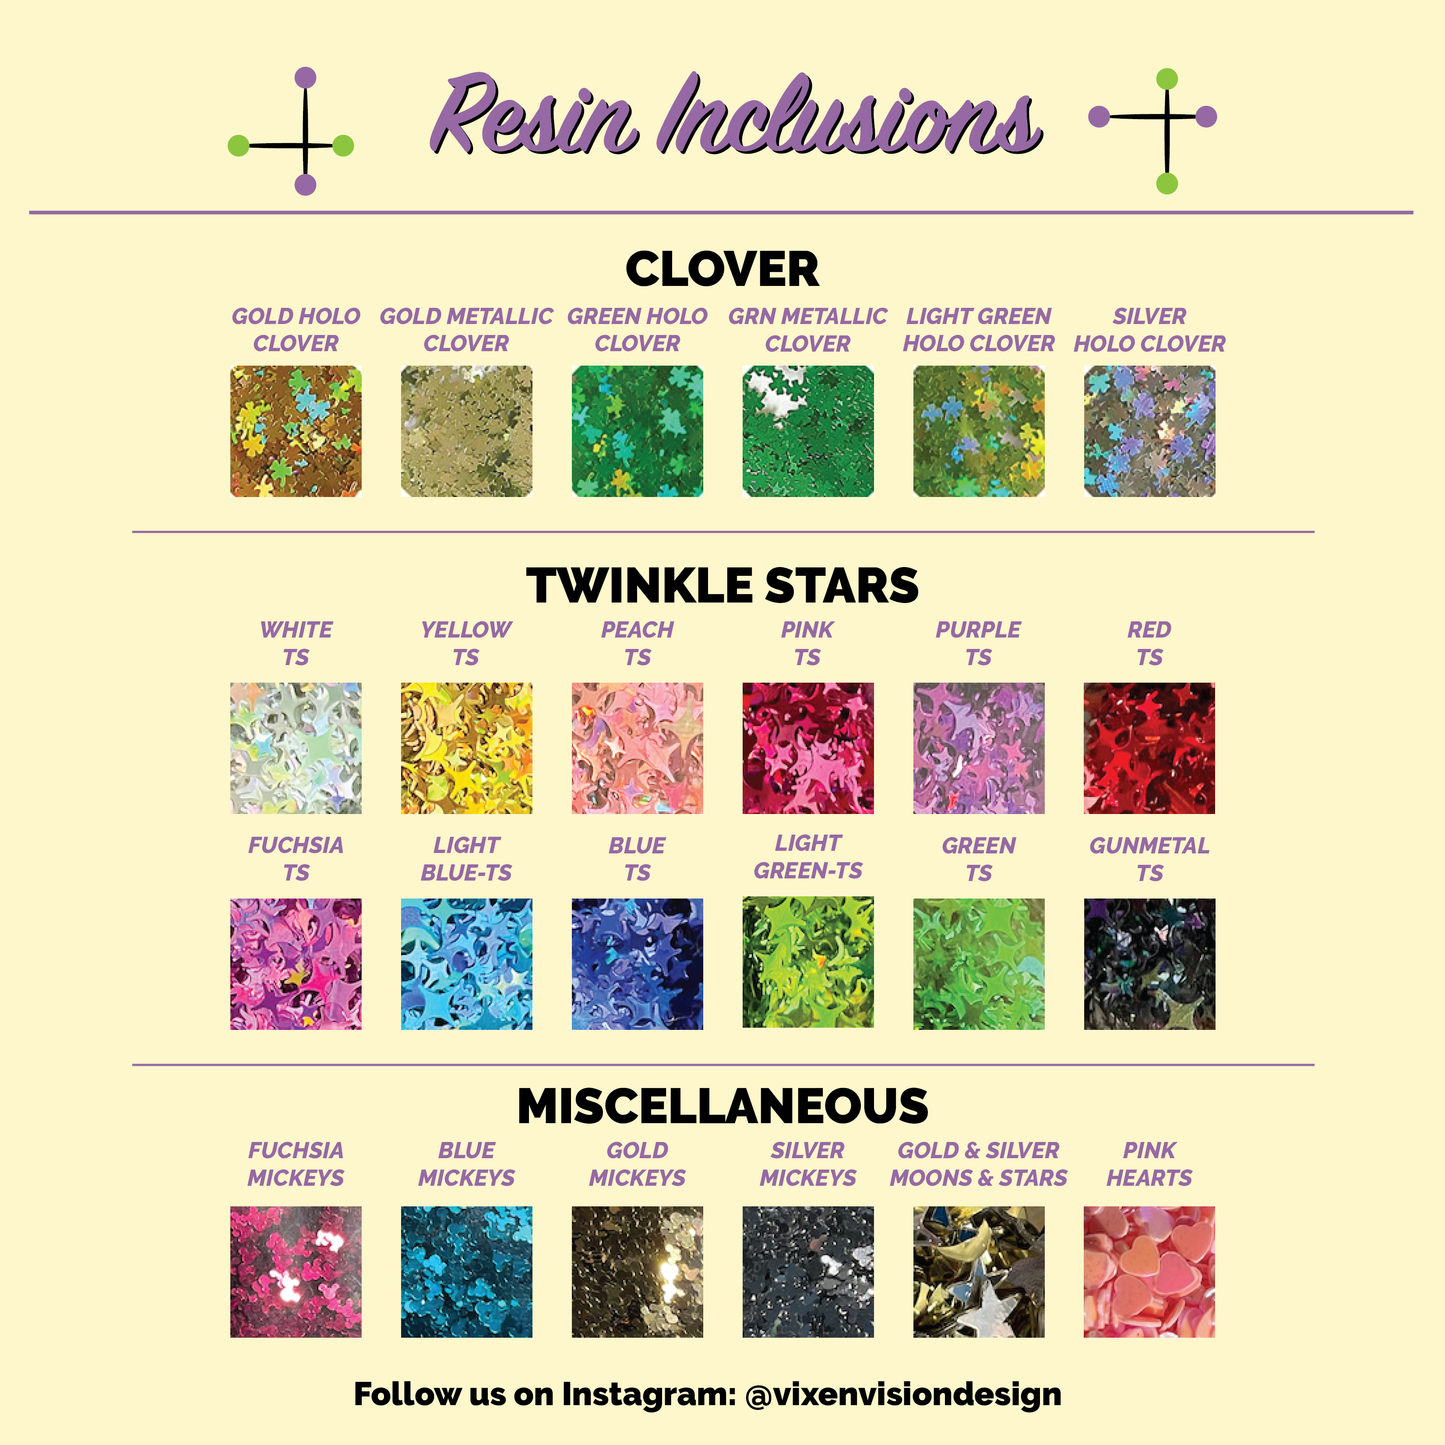 Resin Inclusions - clover, twinkle stars, miscellaneous